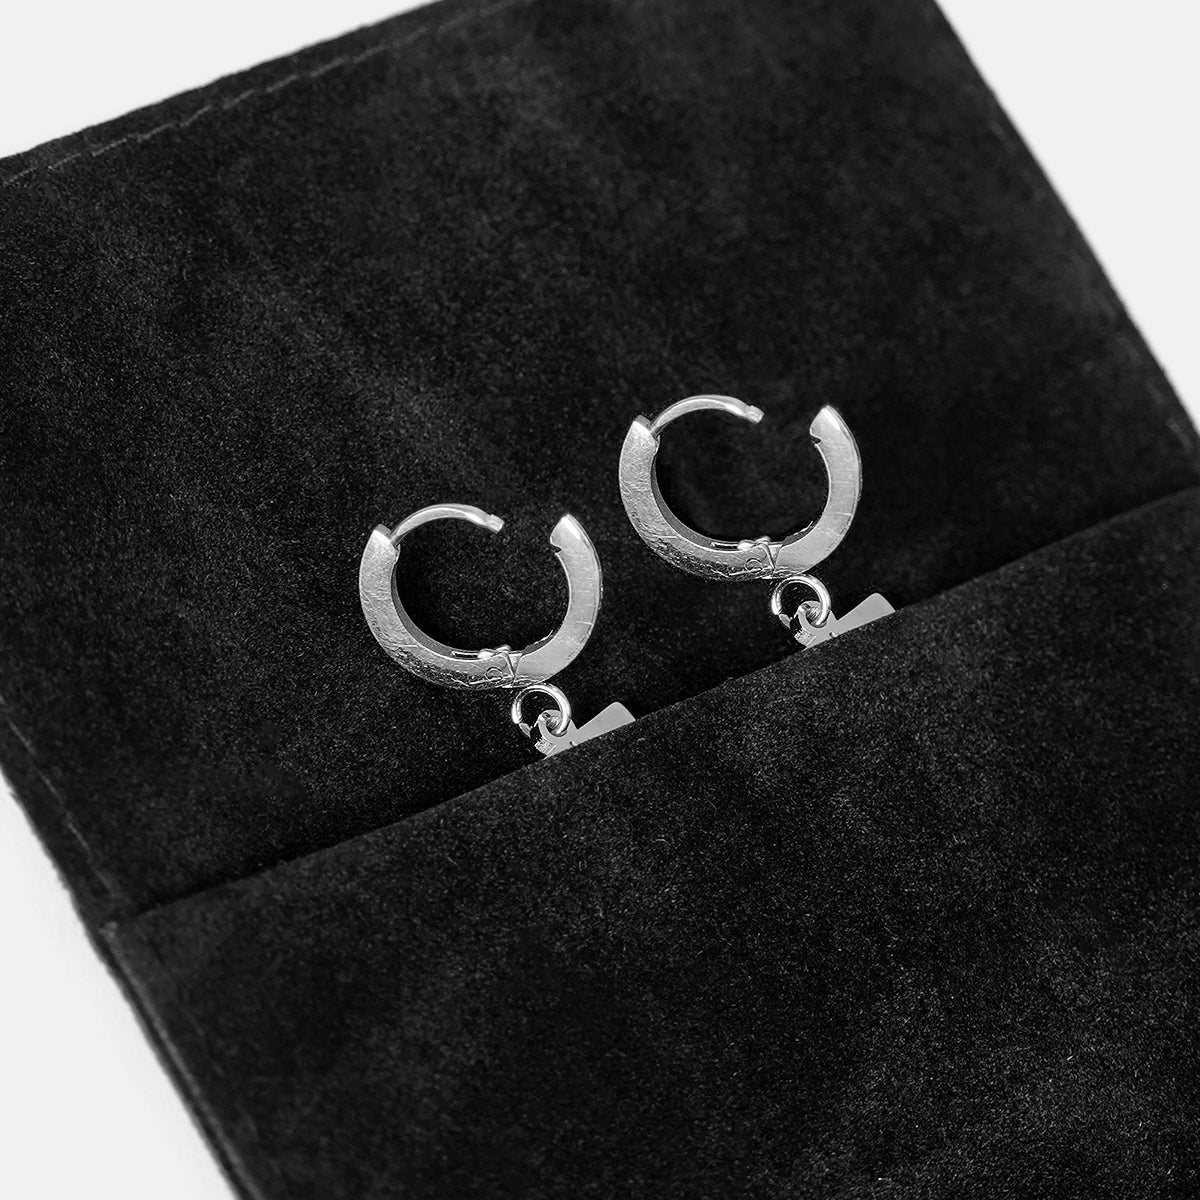 47 Number Earring - Stainless Steel